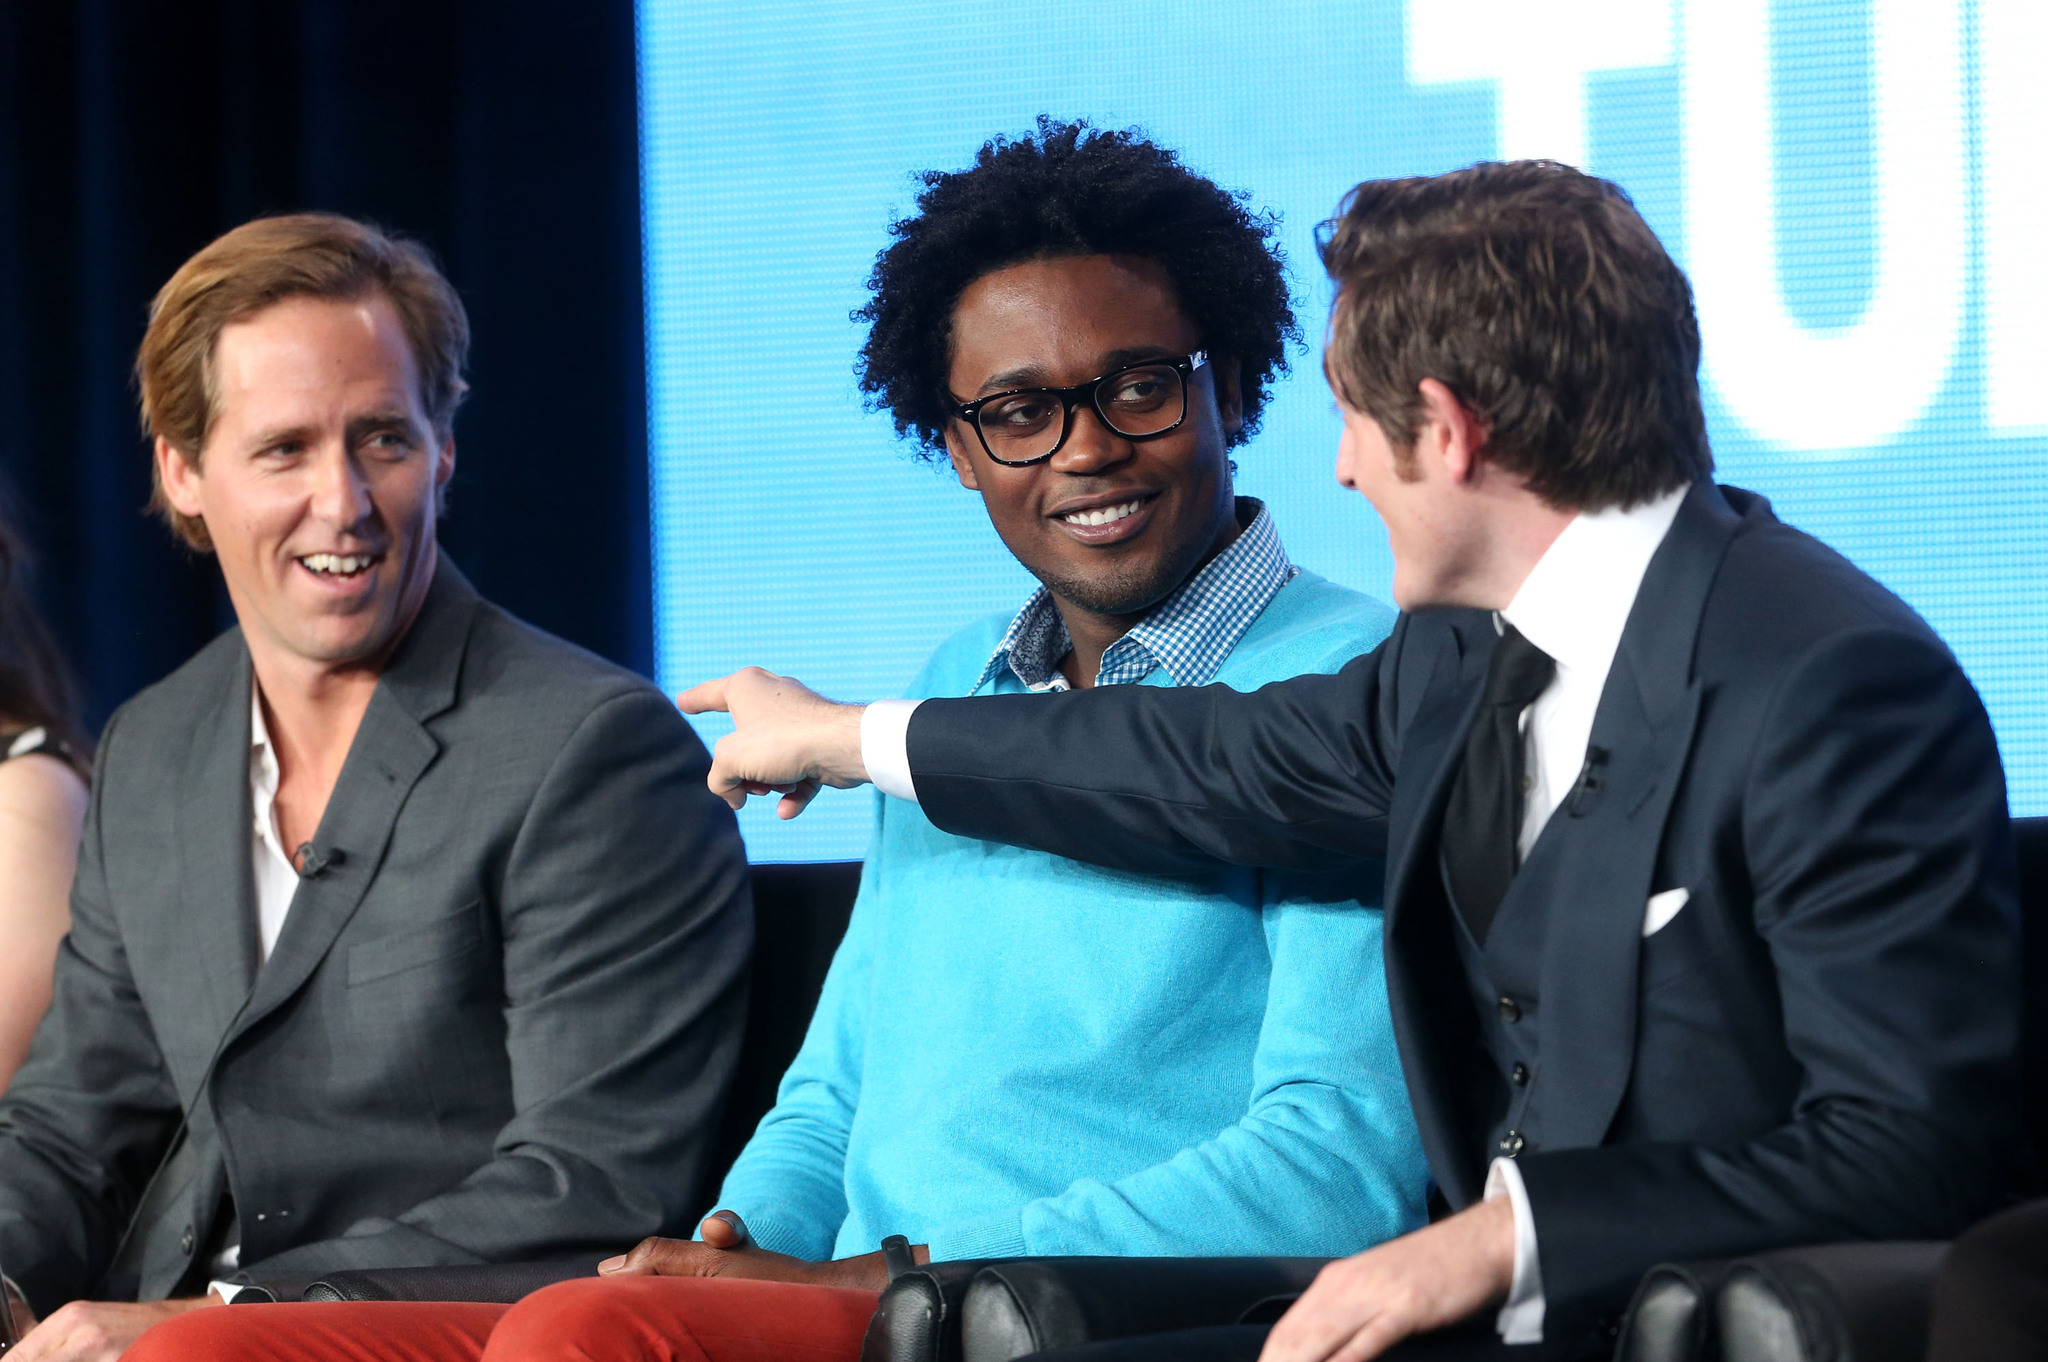 Nat Faxon, Lucas Neff and Echo Kellum at event of Mazyle Houp (2010)